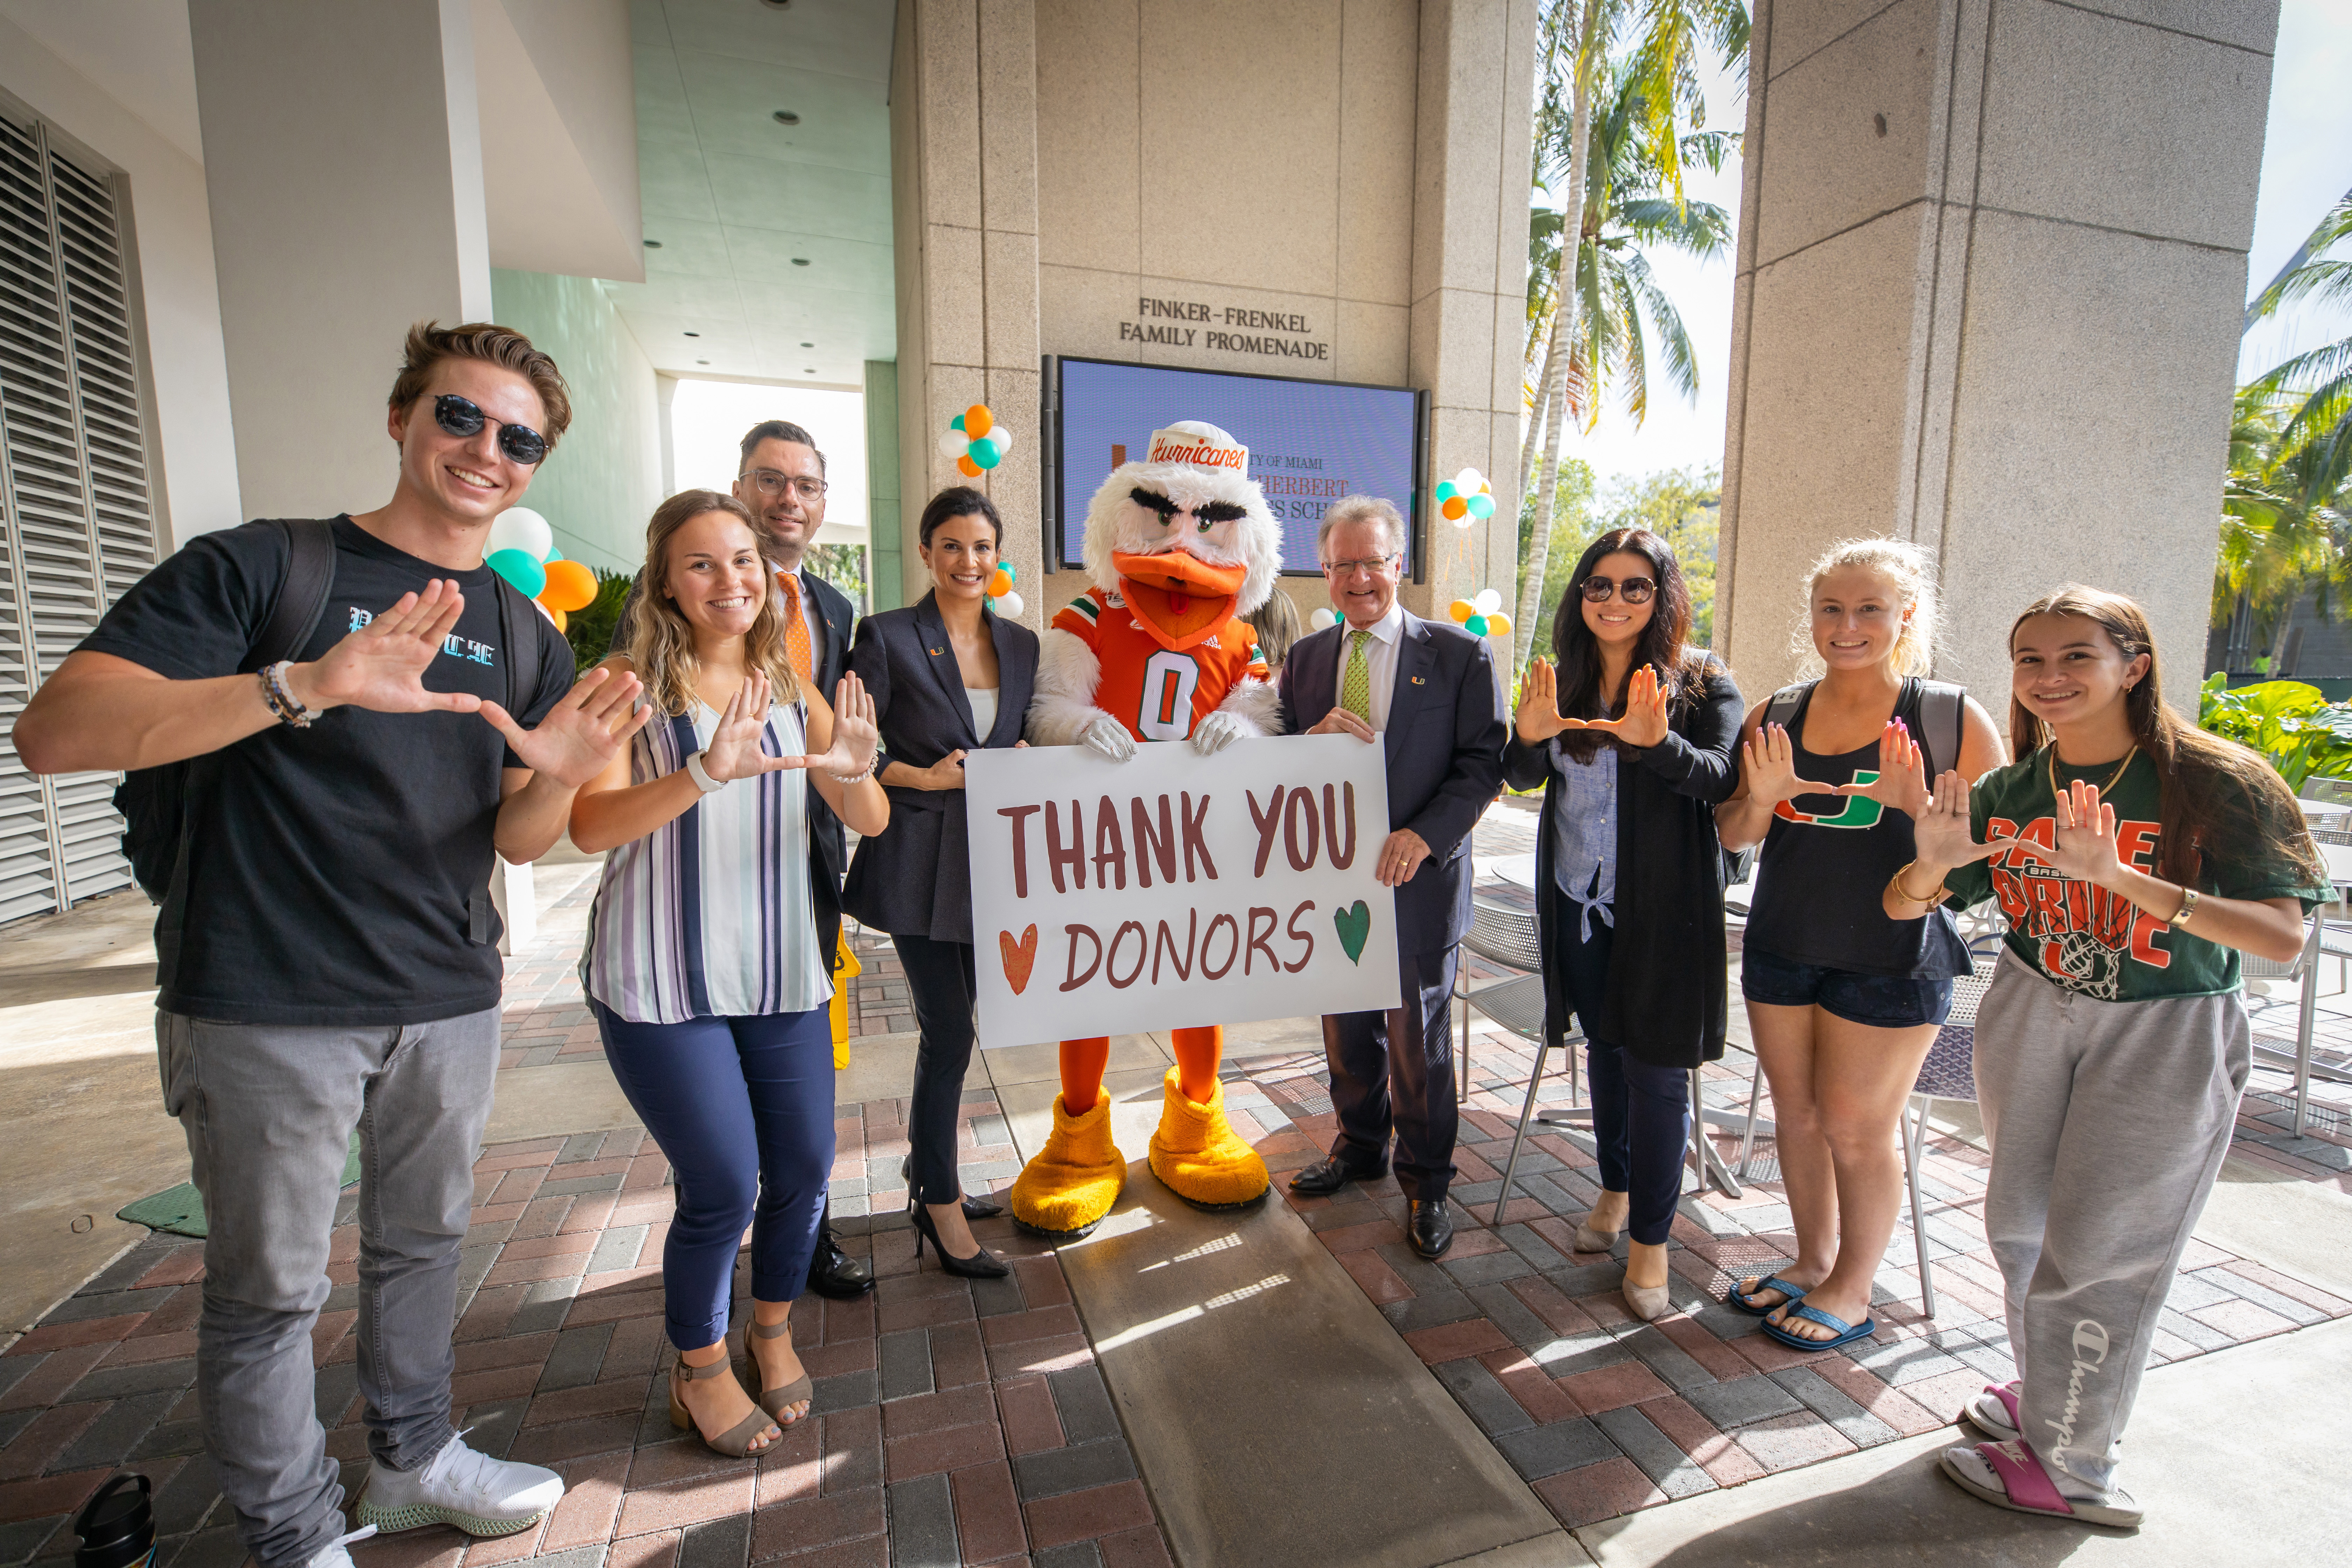 Students and Dean Quelch hold a “thank you donors” sign.